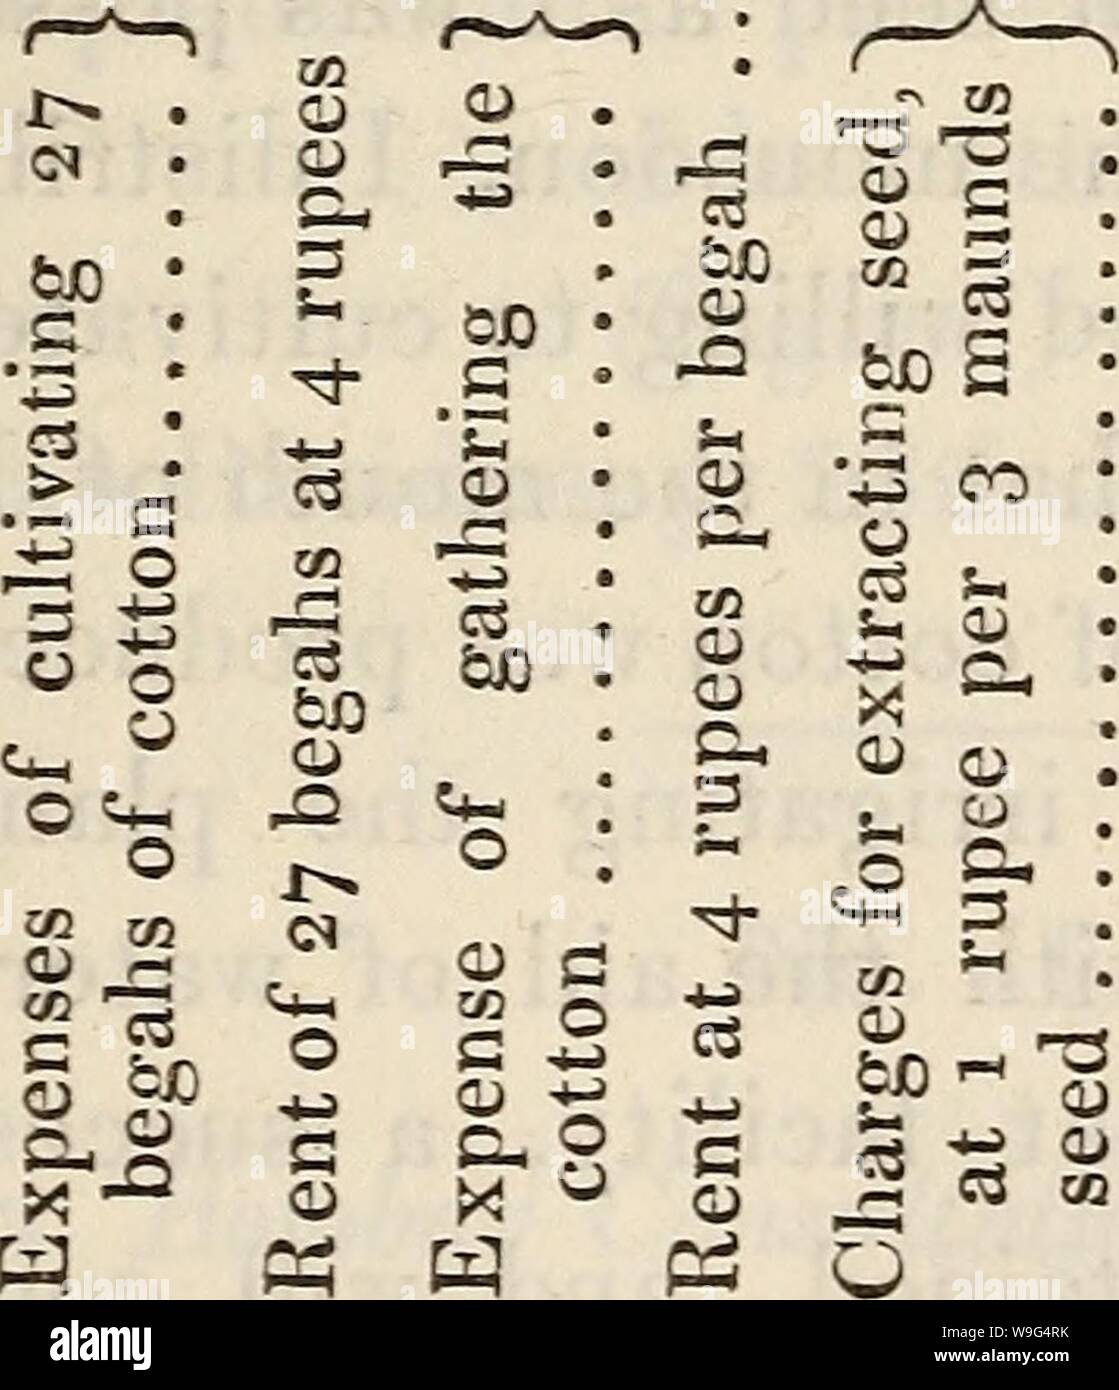 Archive image from page 110 of Culture and manufacture of cotton. Culture and manufacture of cotton wool ..  culturemanufactu00east Year: 1836 ( CO 1 00 CO o o o CO o CO o o O o o CO CO 00 00 o o 00 o CO 00 CO 1-1 CO    o 3 H o o o 3 •BP CO Stock Photo